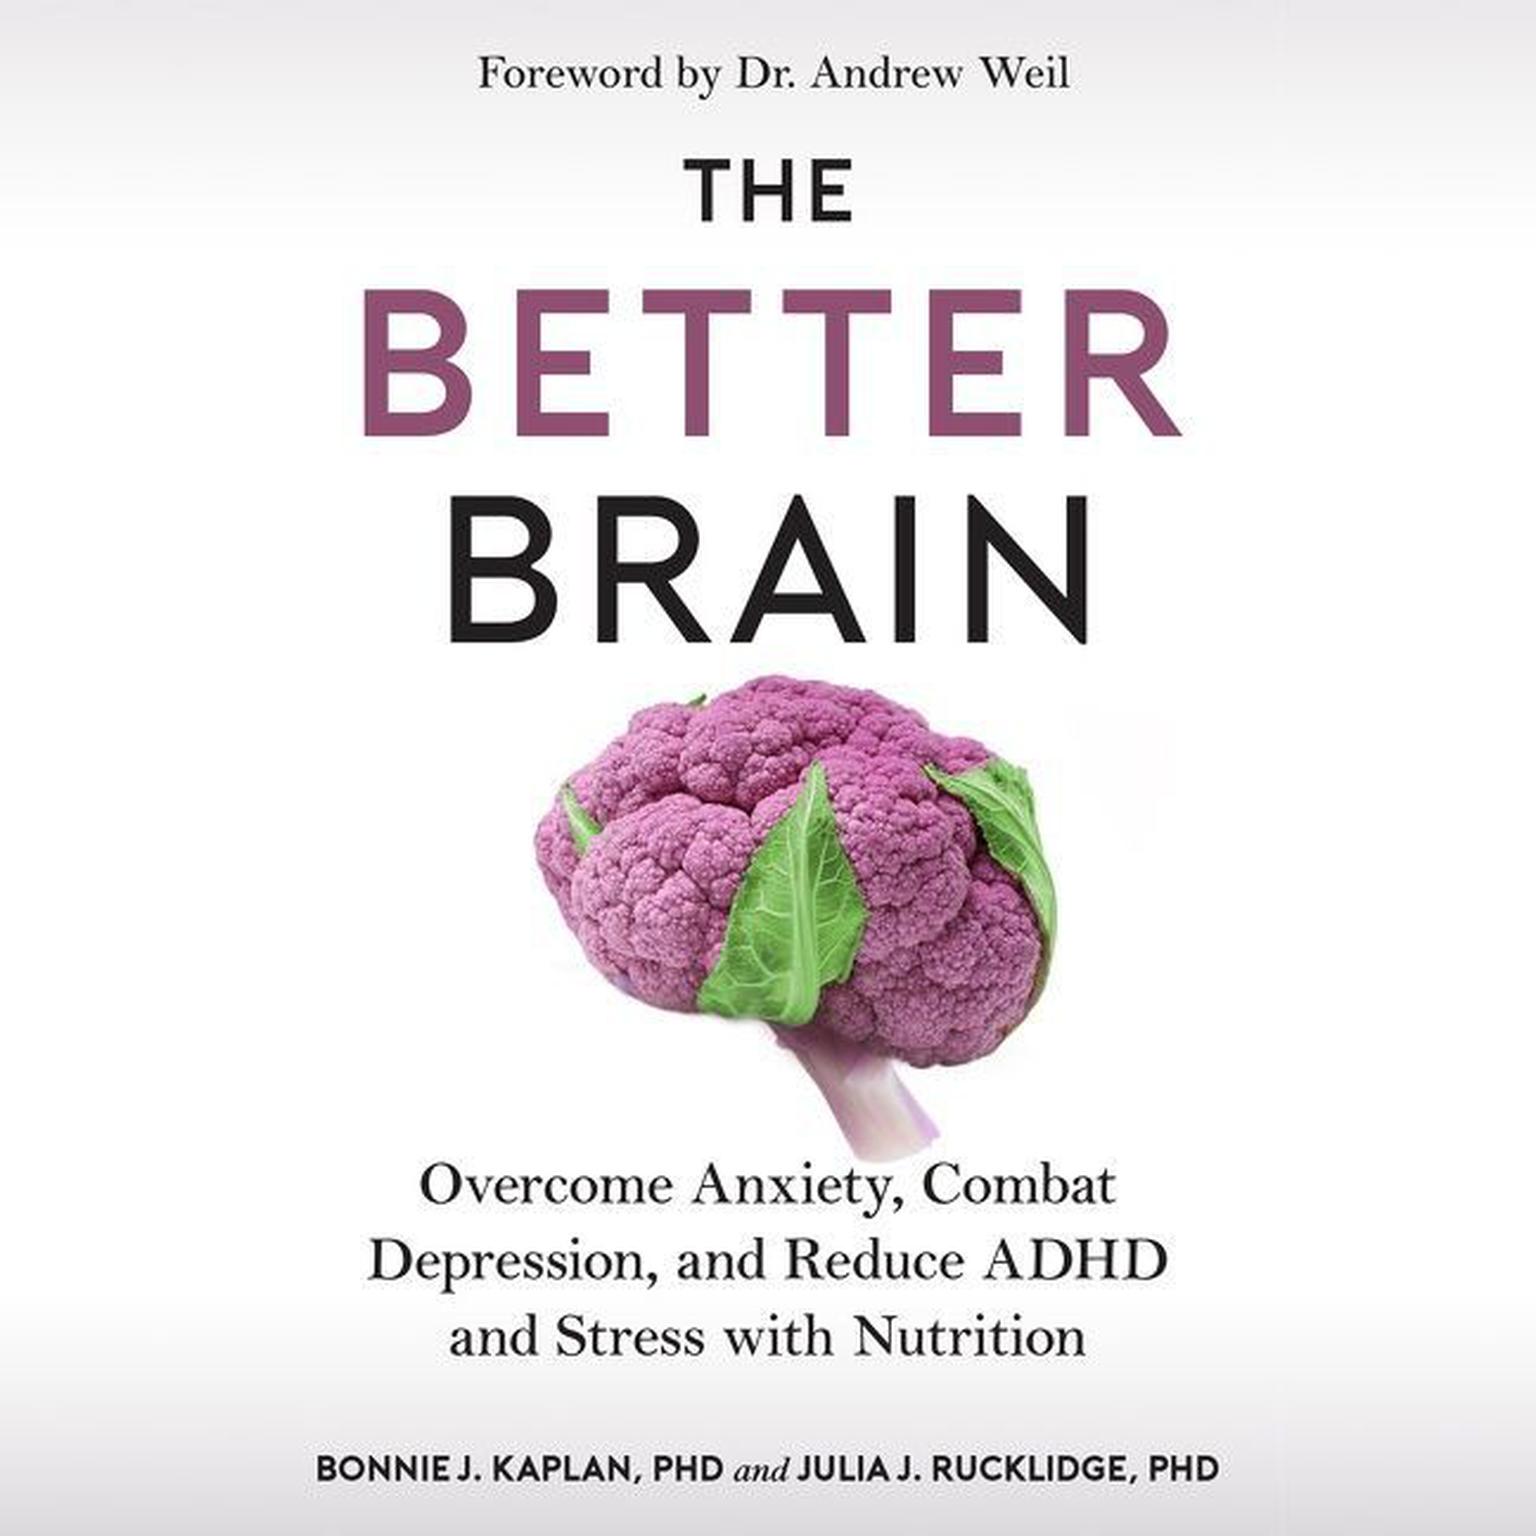 The Better Brain: Overcome Anxiety, Combat Depression, and Reduce ADHD and Stress with Nutrition Audiobook, by Bonnie J. Kaplan